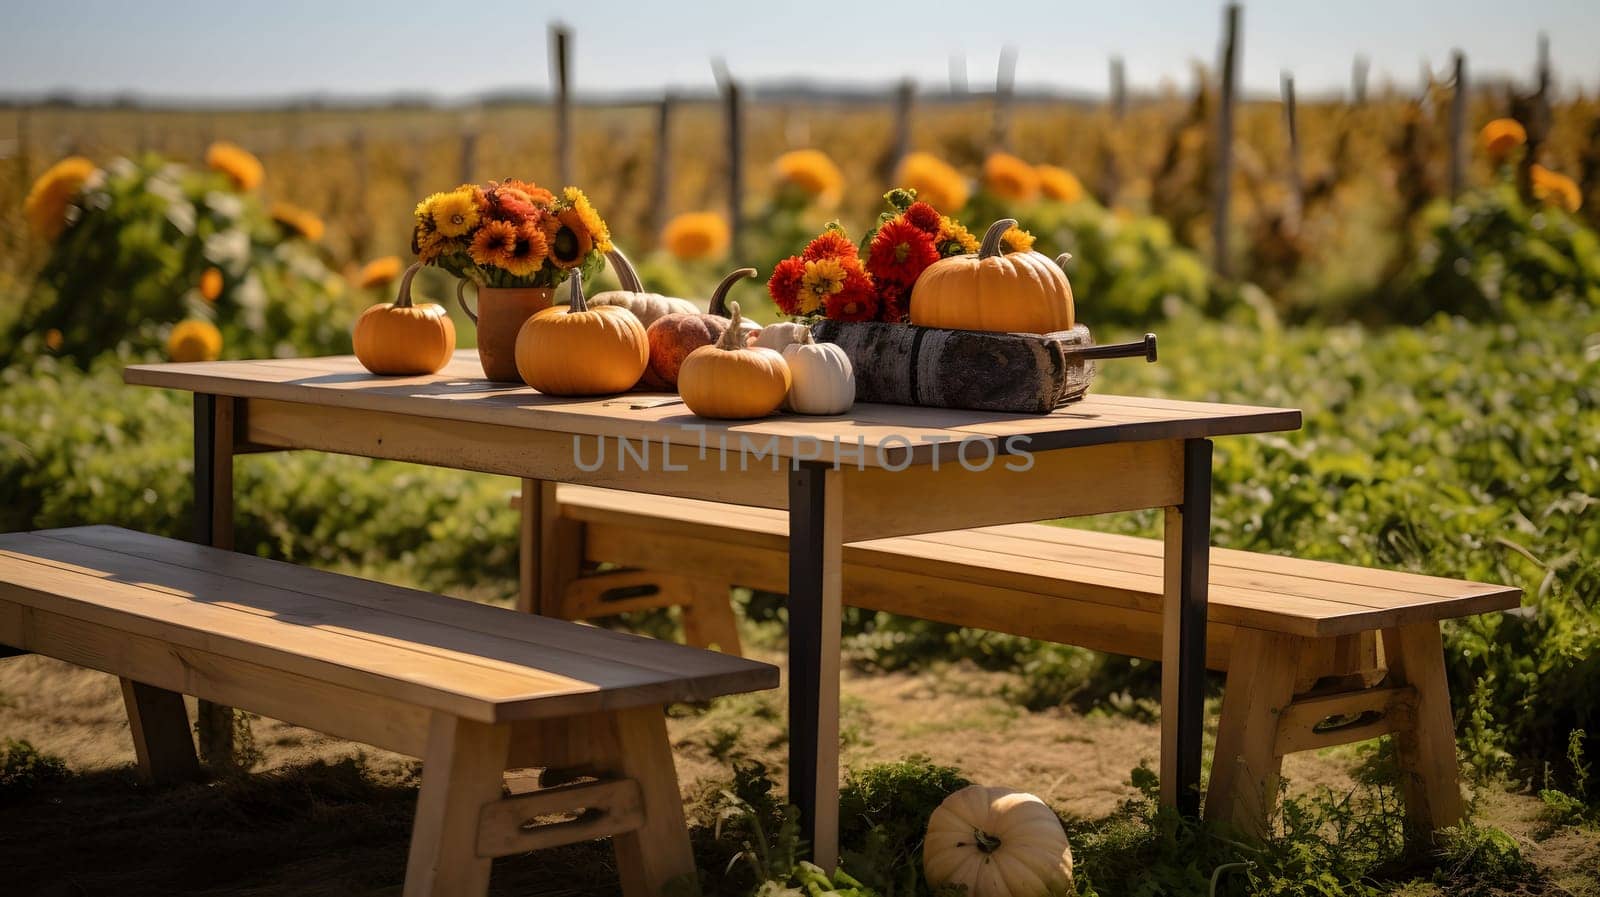 Photo of a wooden table with benches, and on it plates of pumpkins in the background field. Pumpkin as a dish of thanksgiving for the harvest. by ThemesS